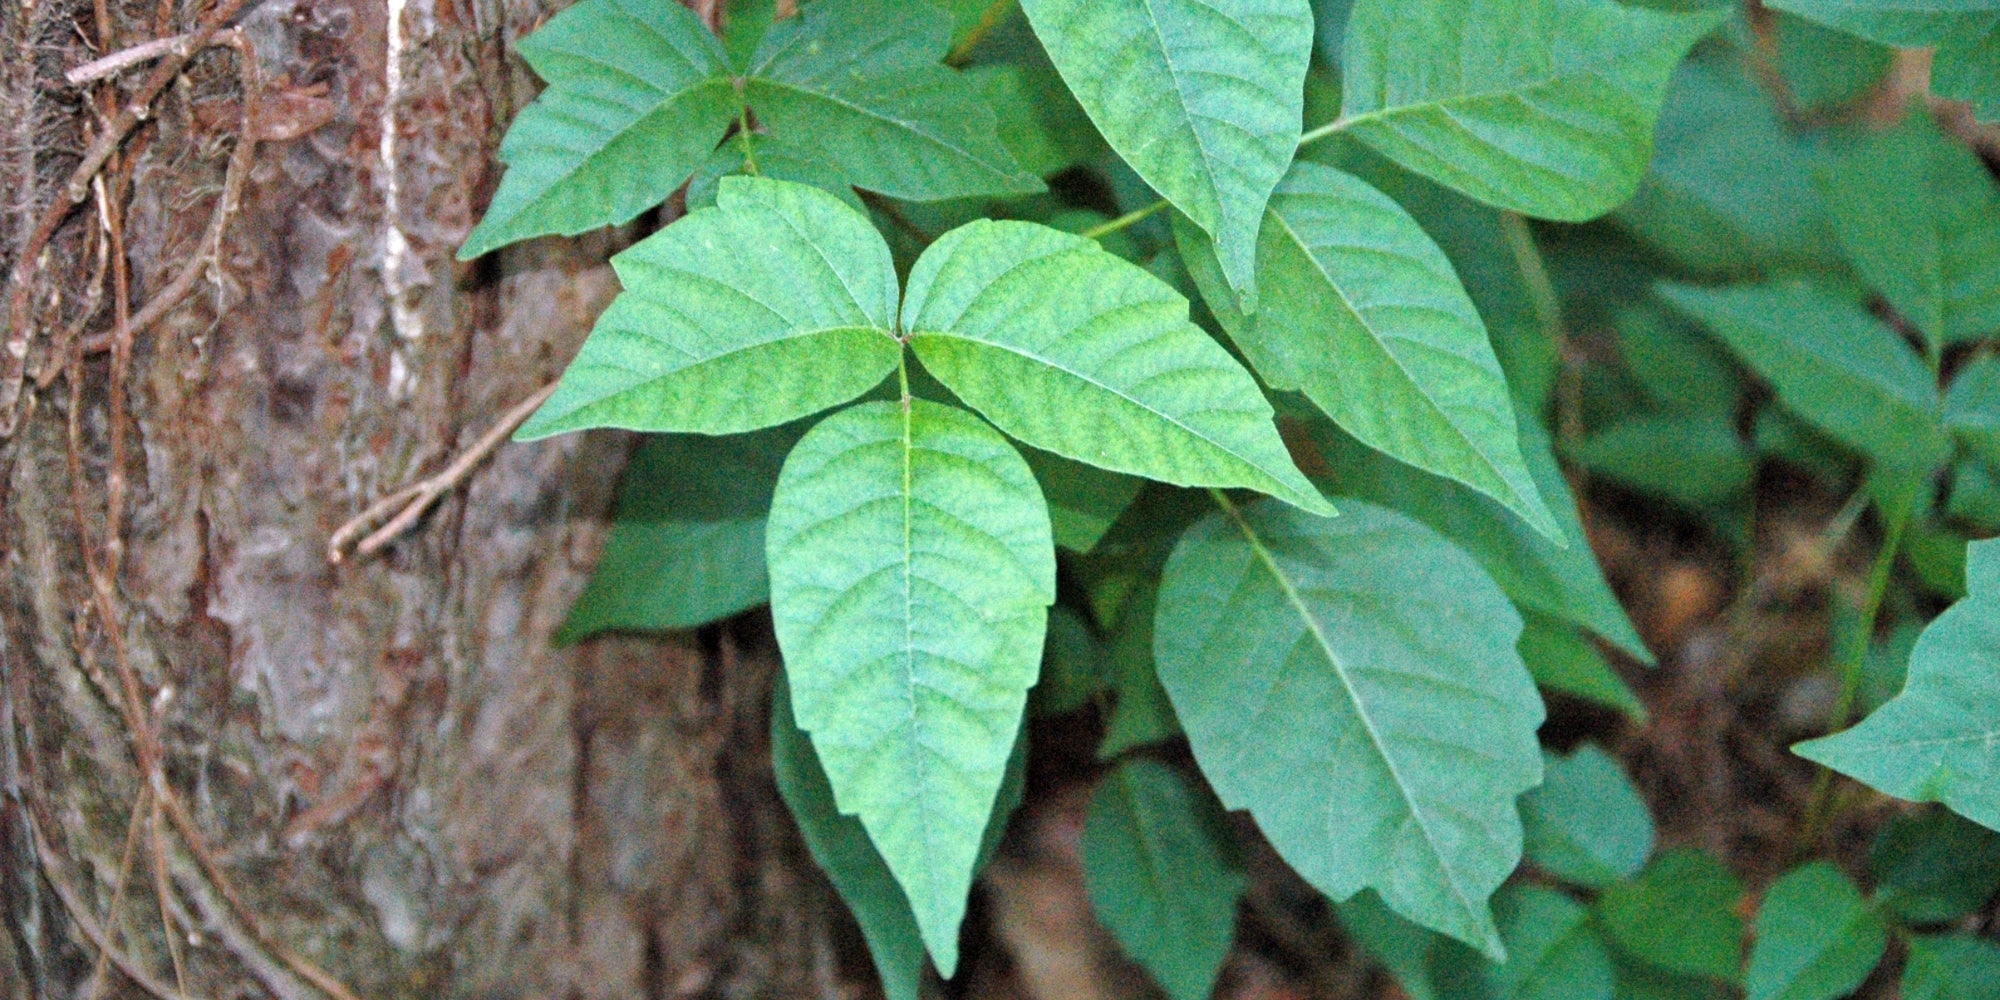 From Rash to Relief: Poison Ivy Prevention and Treatment